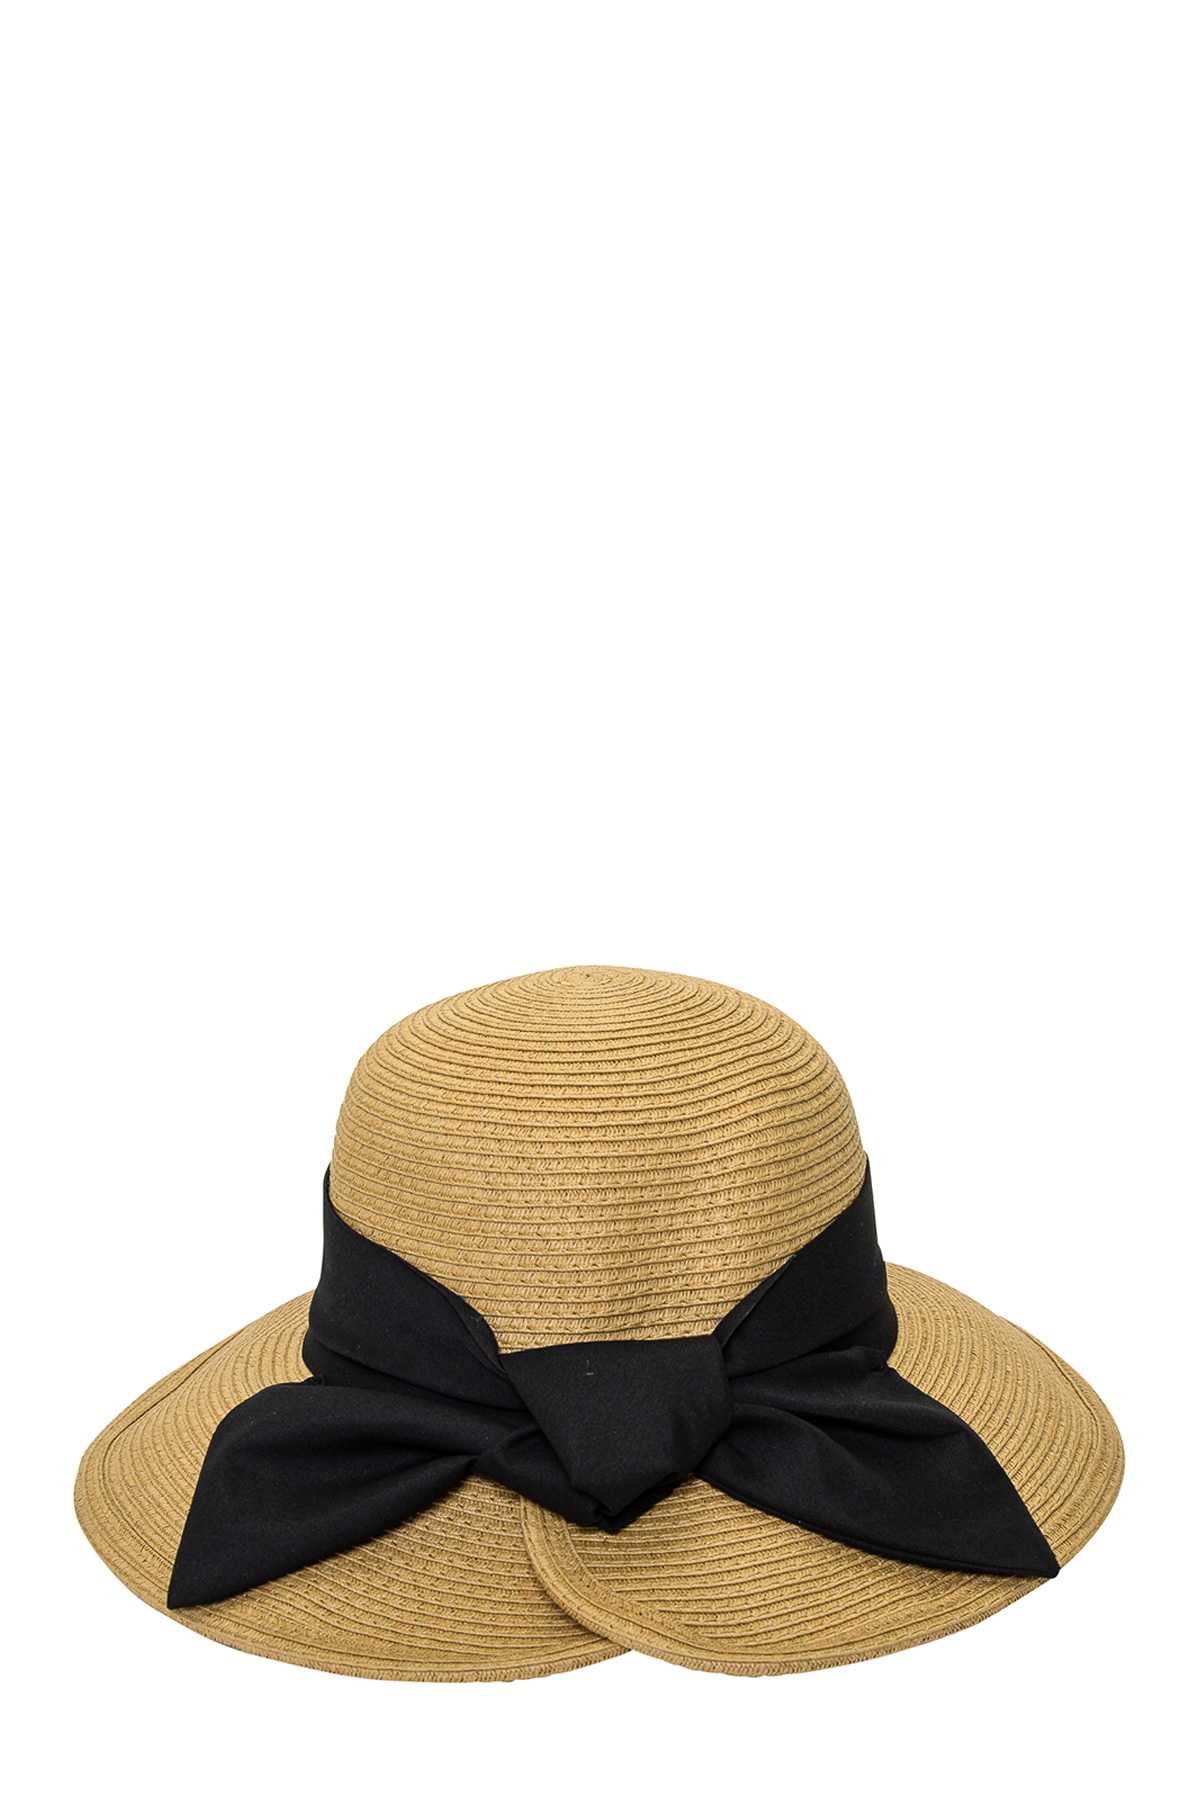 Straw Bucket Hat with Black Ribbon Band